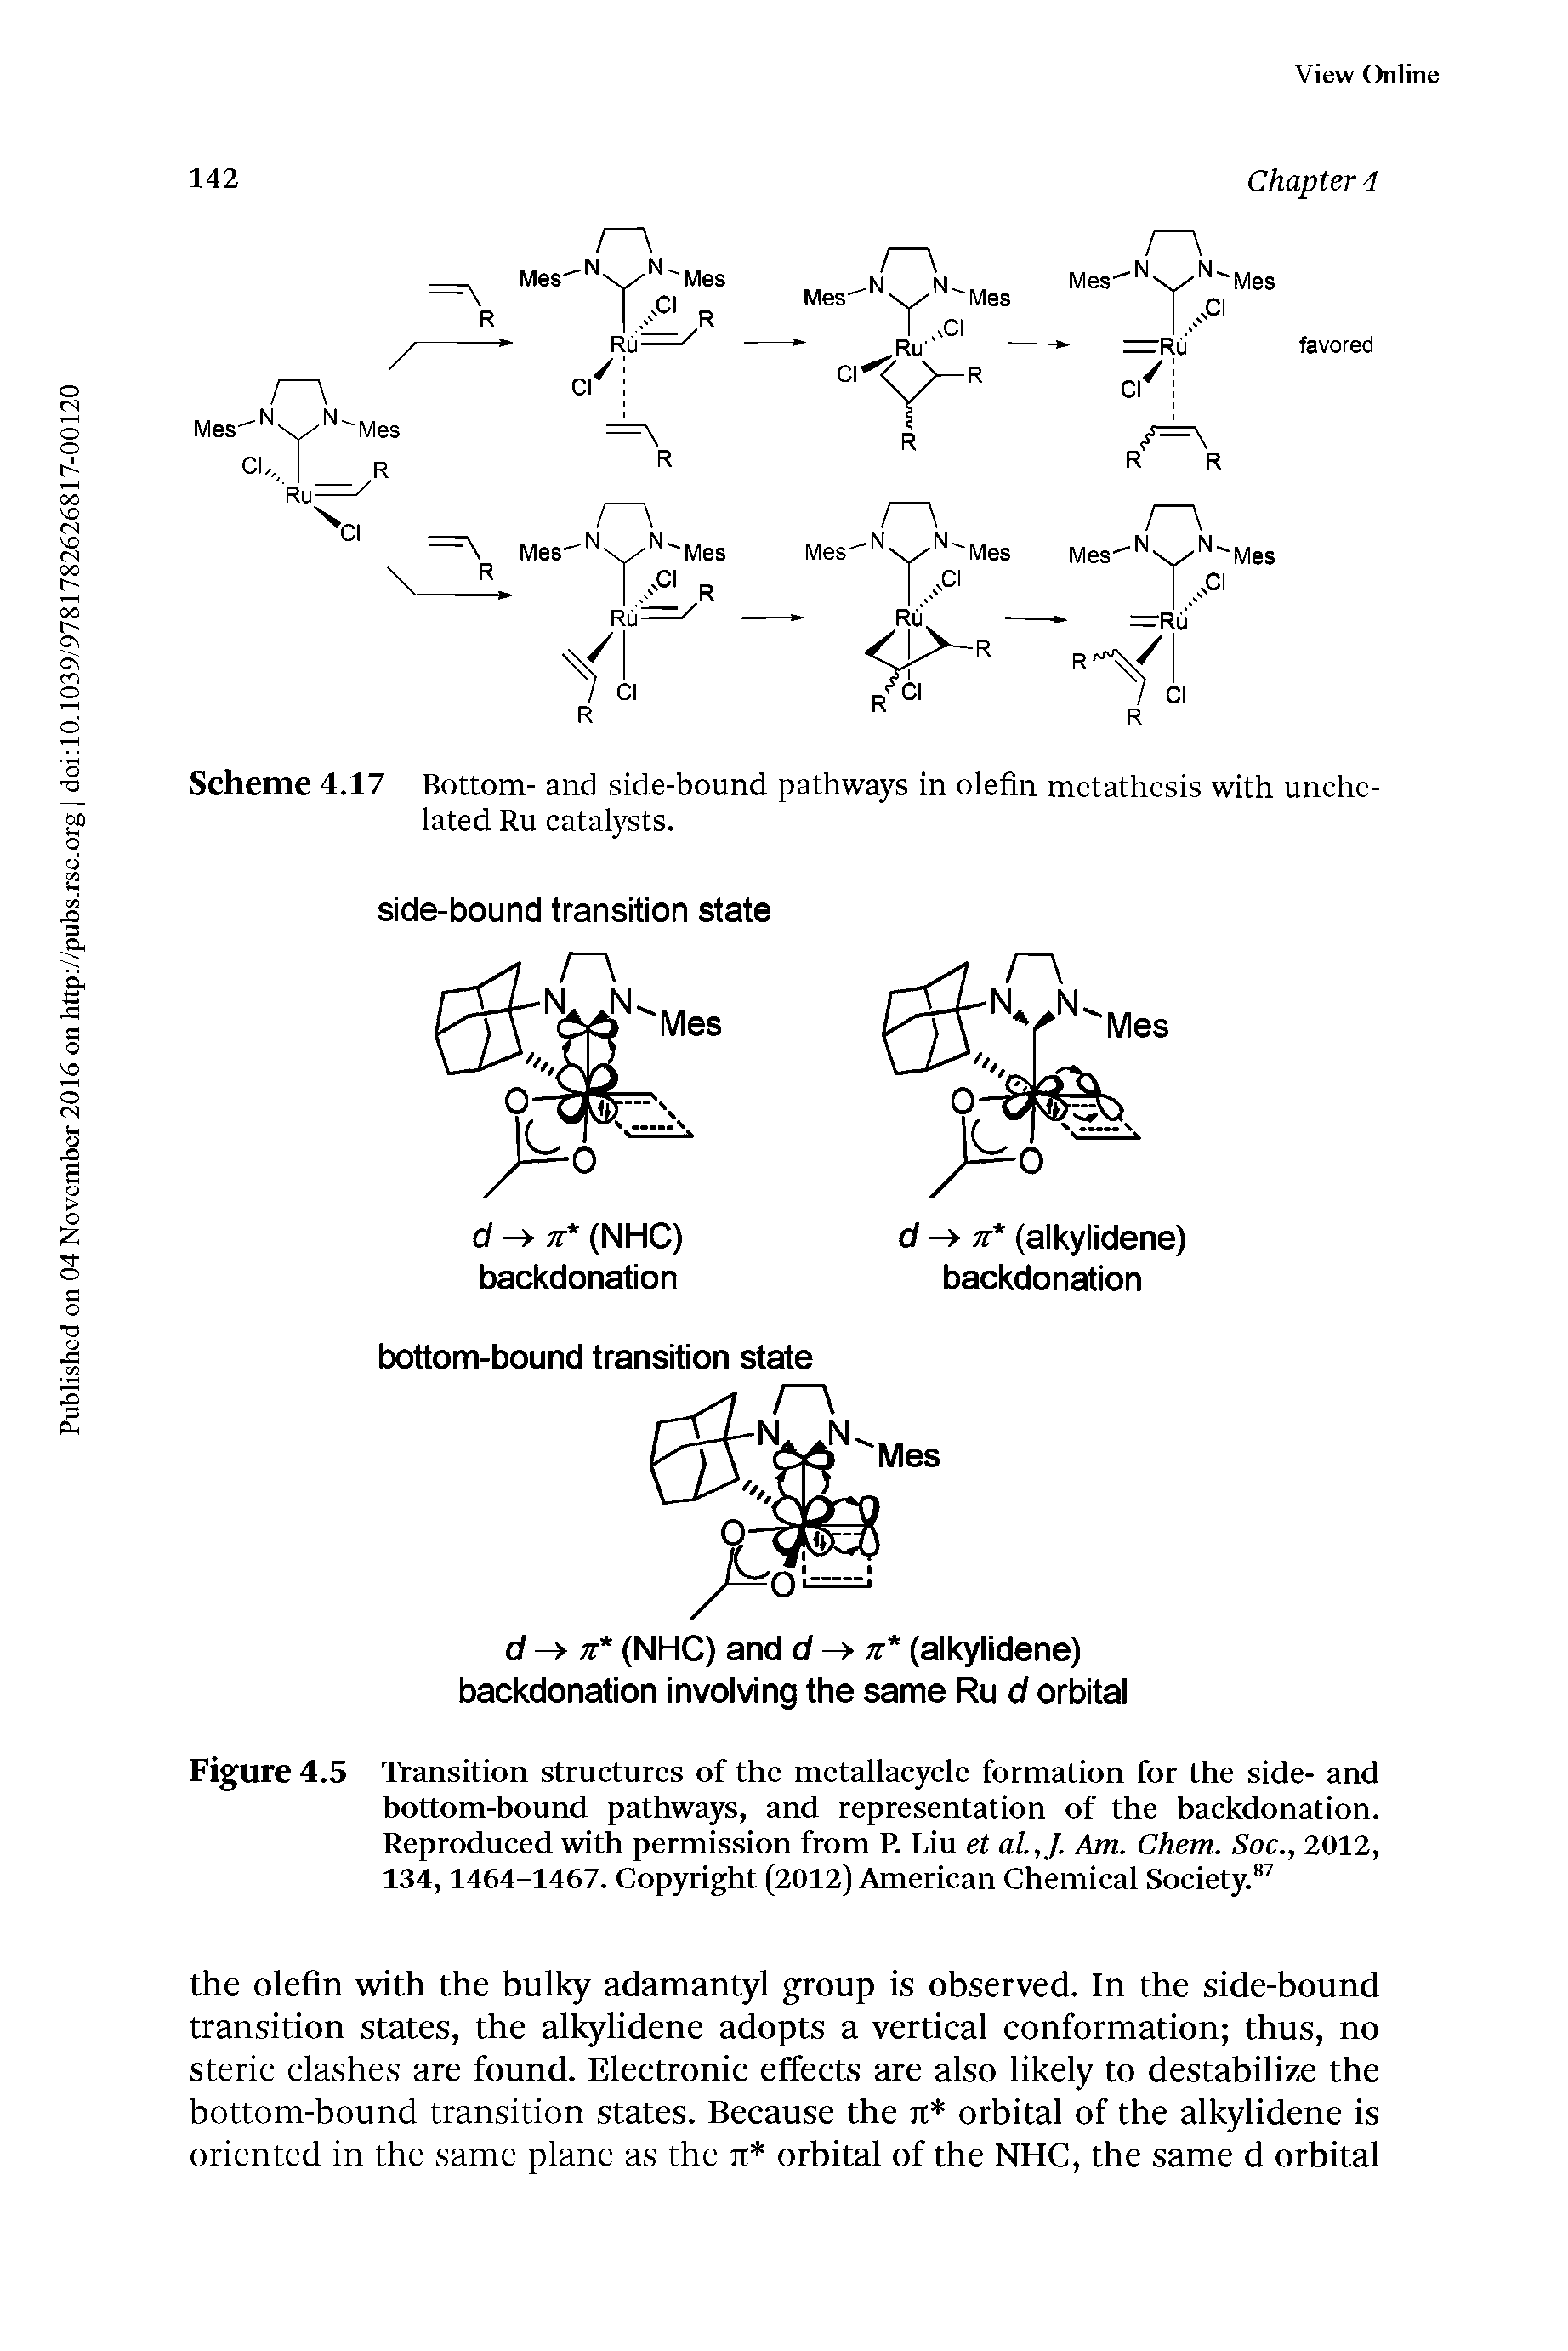 Figure 4.5 Transition structures of the metallacycle formation for the side- and bottom-bound pathways, and representation of the backdonation. Reproduced with permission from R Liu et al.,J. Am. Chem. Soc., 2012, 134,1464-1467. Copyright (2012) American Chemical Society. ...